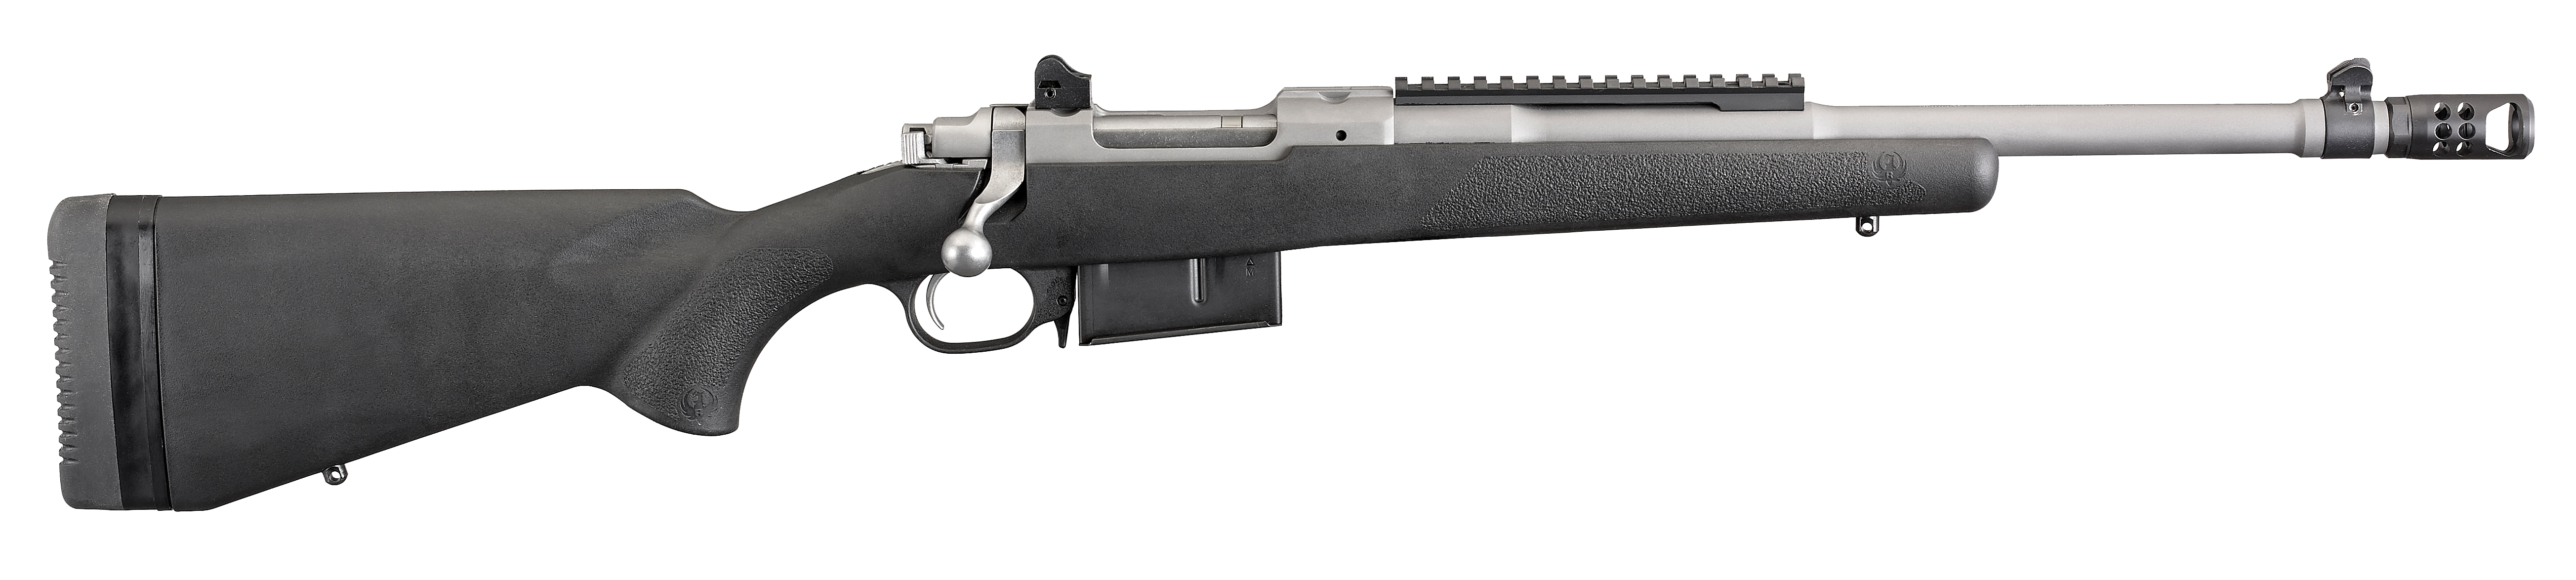 Model 77 Scout Rifle